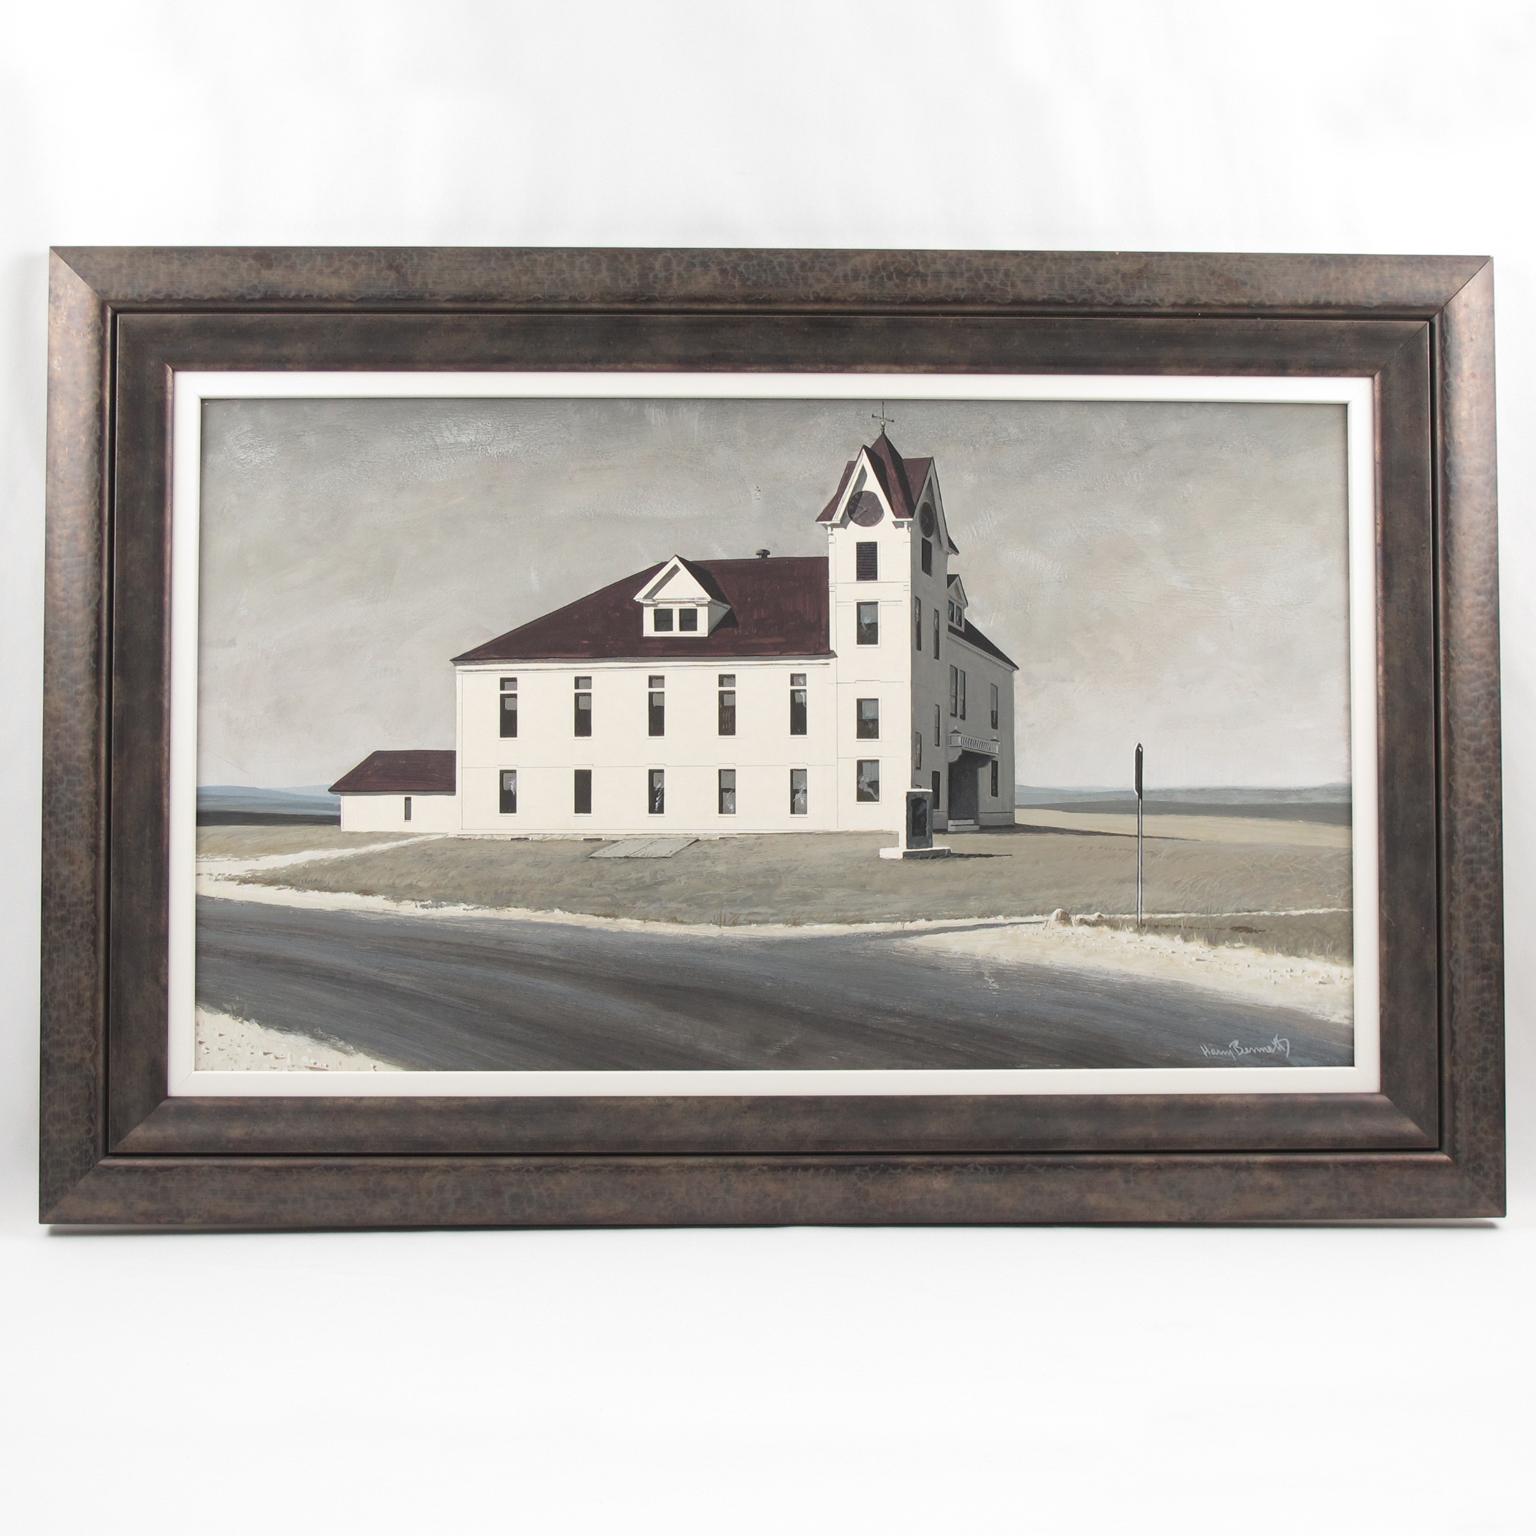 Stunning gouache on cardboard painting by American Artist Harry Bennett (1919 - 2012). This early hyperrealist design features a church or school in the middle of nowhere in the countryside. The artist signed the composition in the bottom right